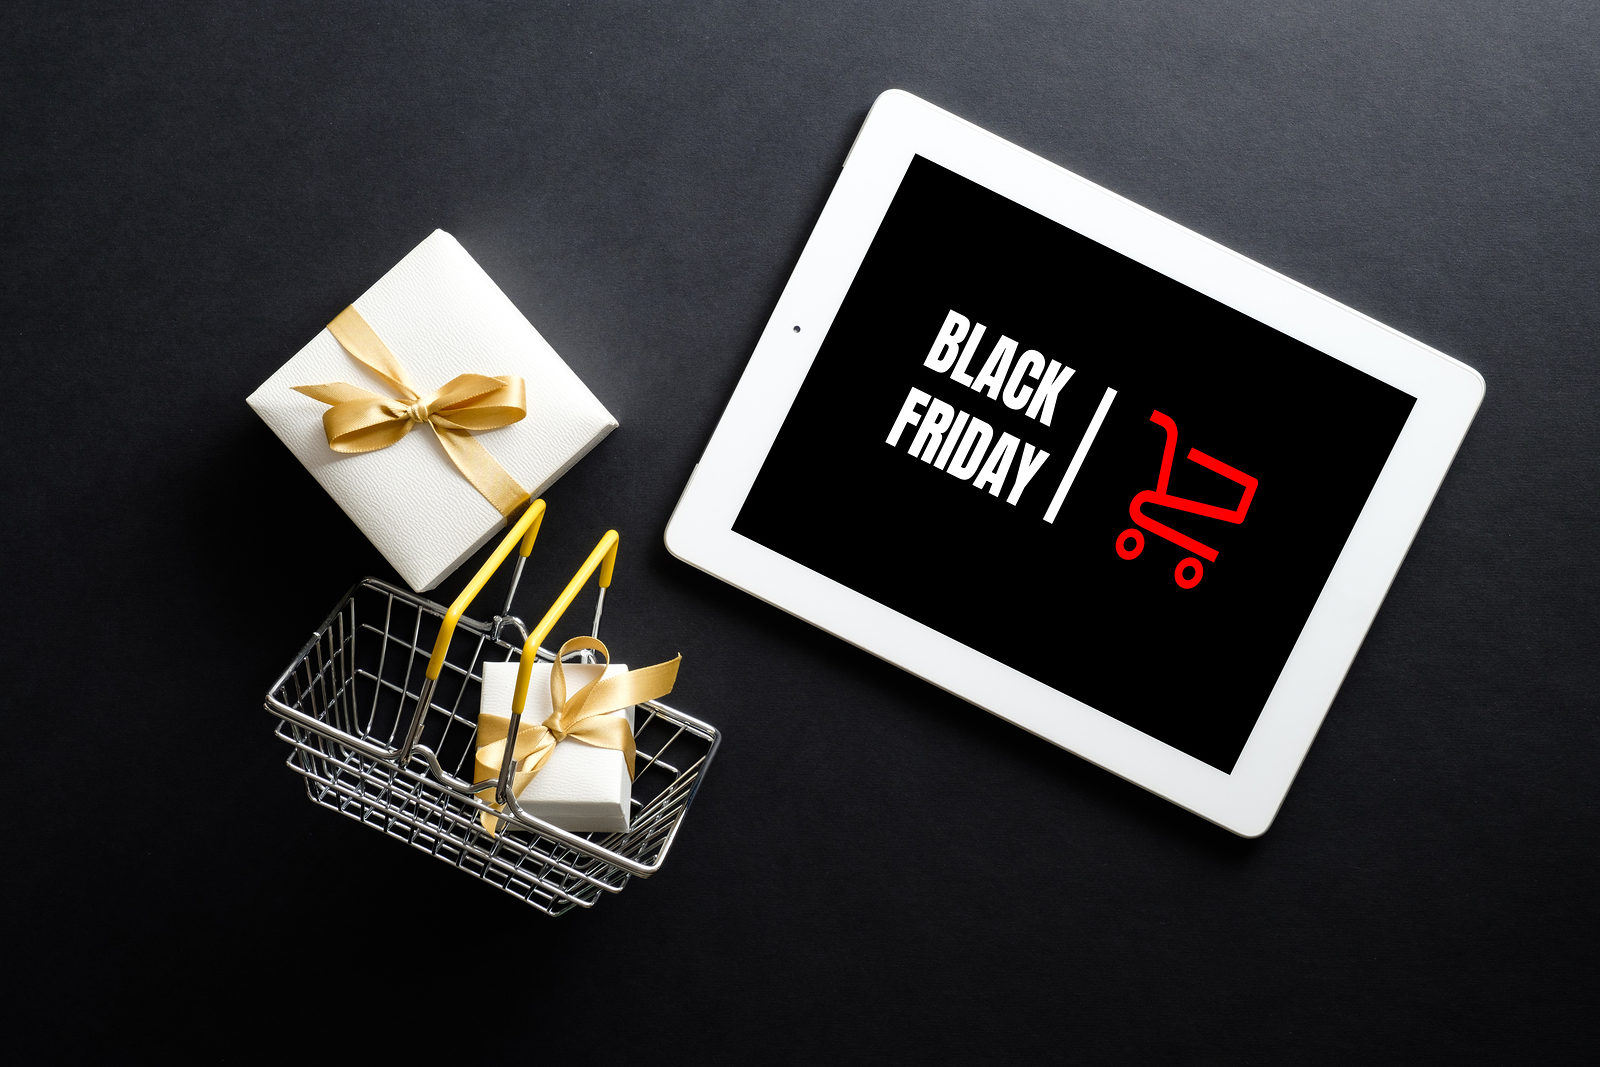 Black Friday text on ipad screen with shopping basket and wrapped gifts to convey the message of how retailers can prepare for Black Friday